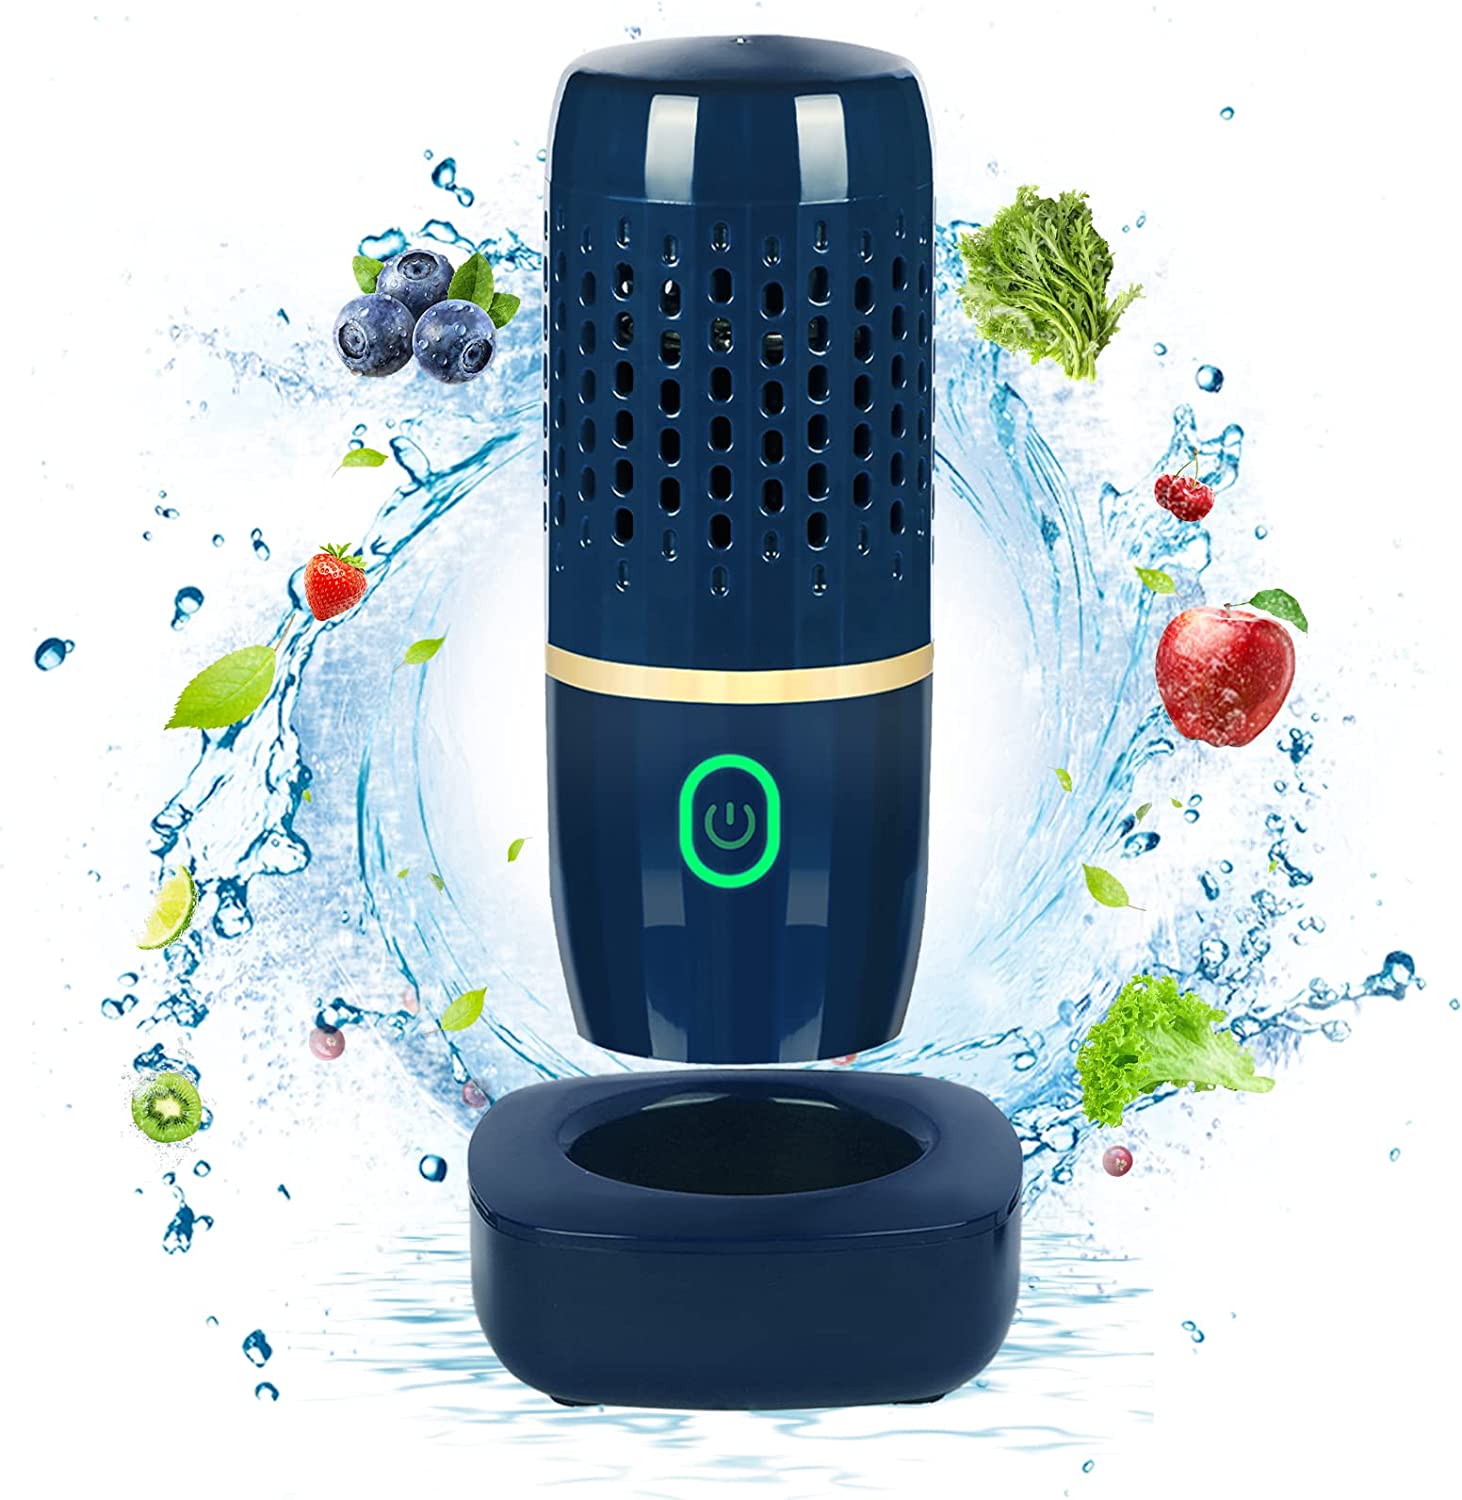 Fruit and Vegetable Washing Machine,Portable Fruit Cleaner Device,Fruit Cleaner Device in Water,Deeply Cleans Fresh Produce,For Cleaning Fruit,Vegetable-Seafood,Tableware(Blue)